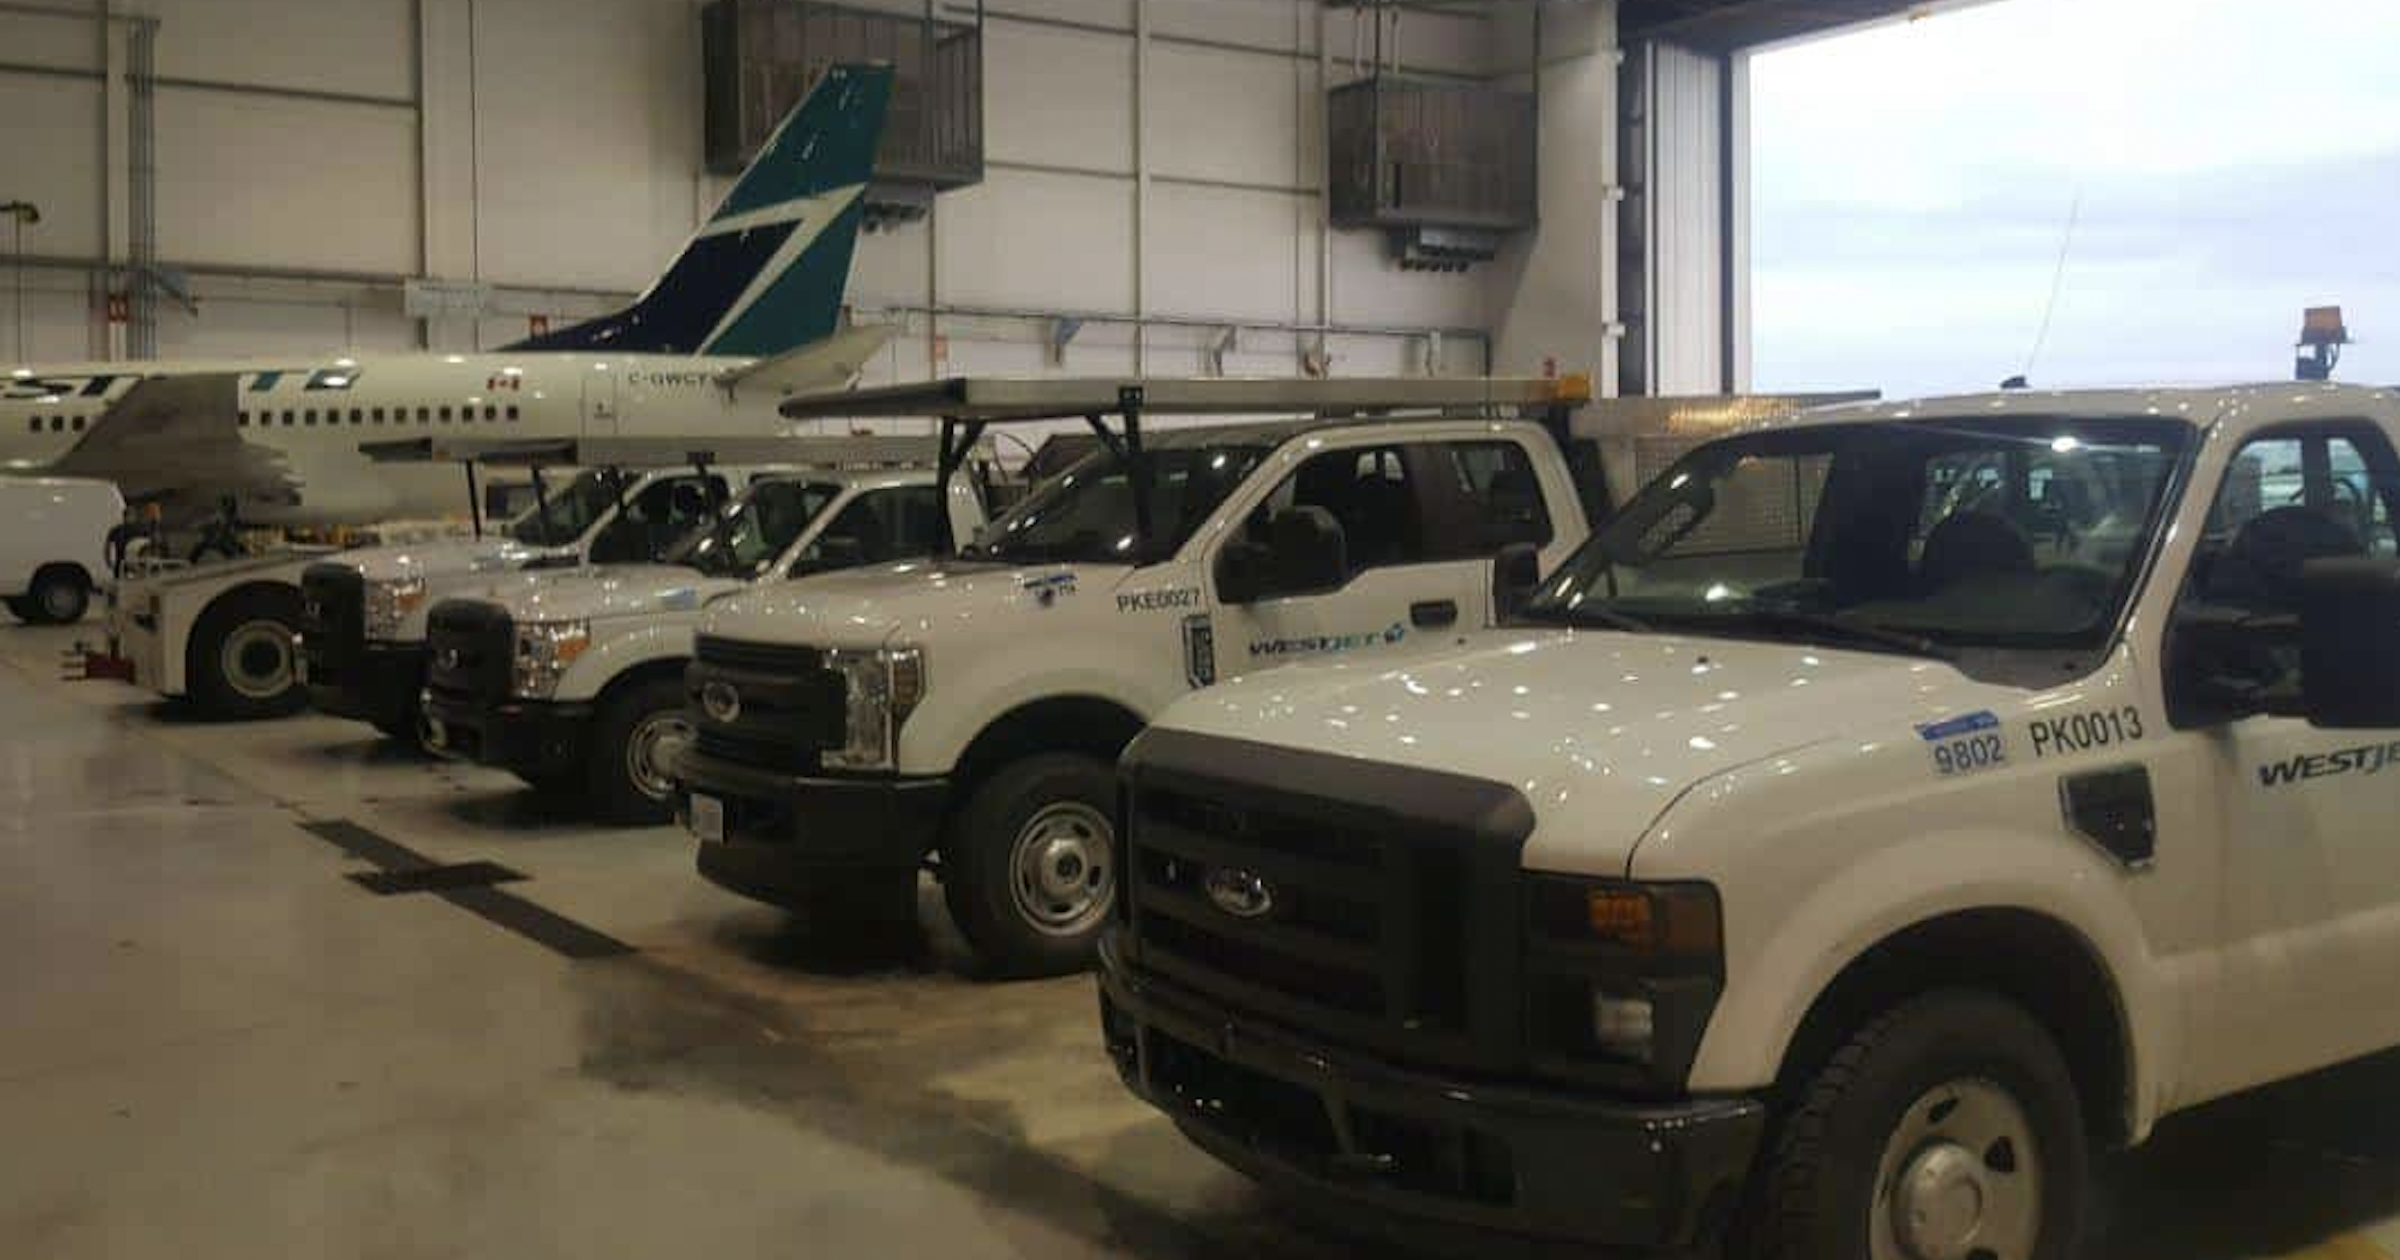 You are currently viewing 10 pictures from my visit of a WestJet hangar